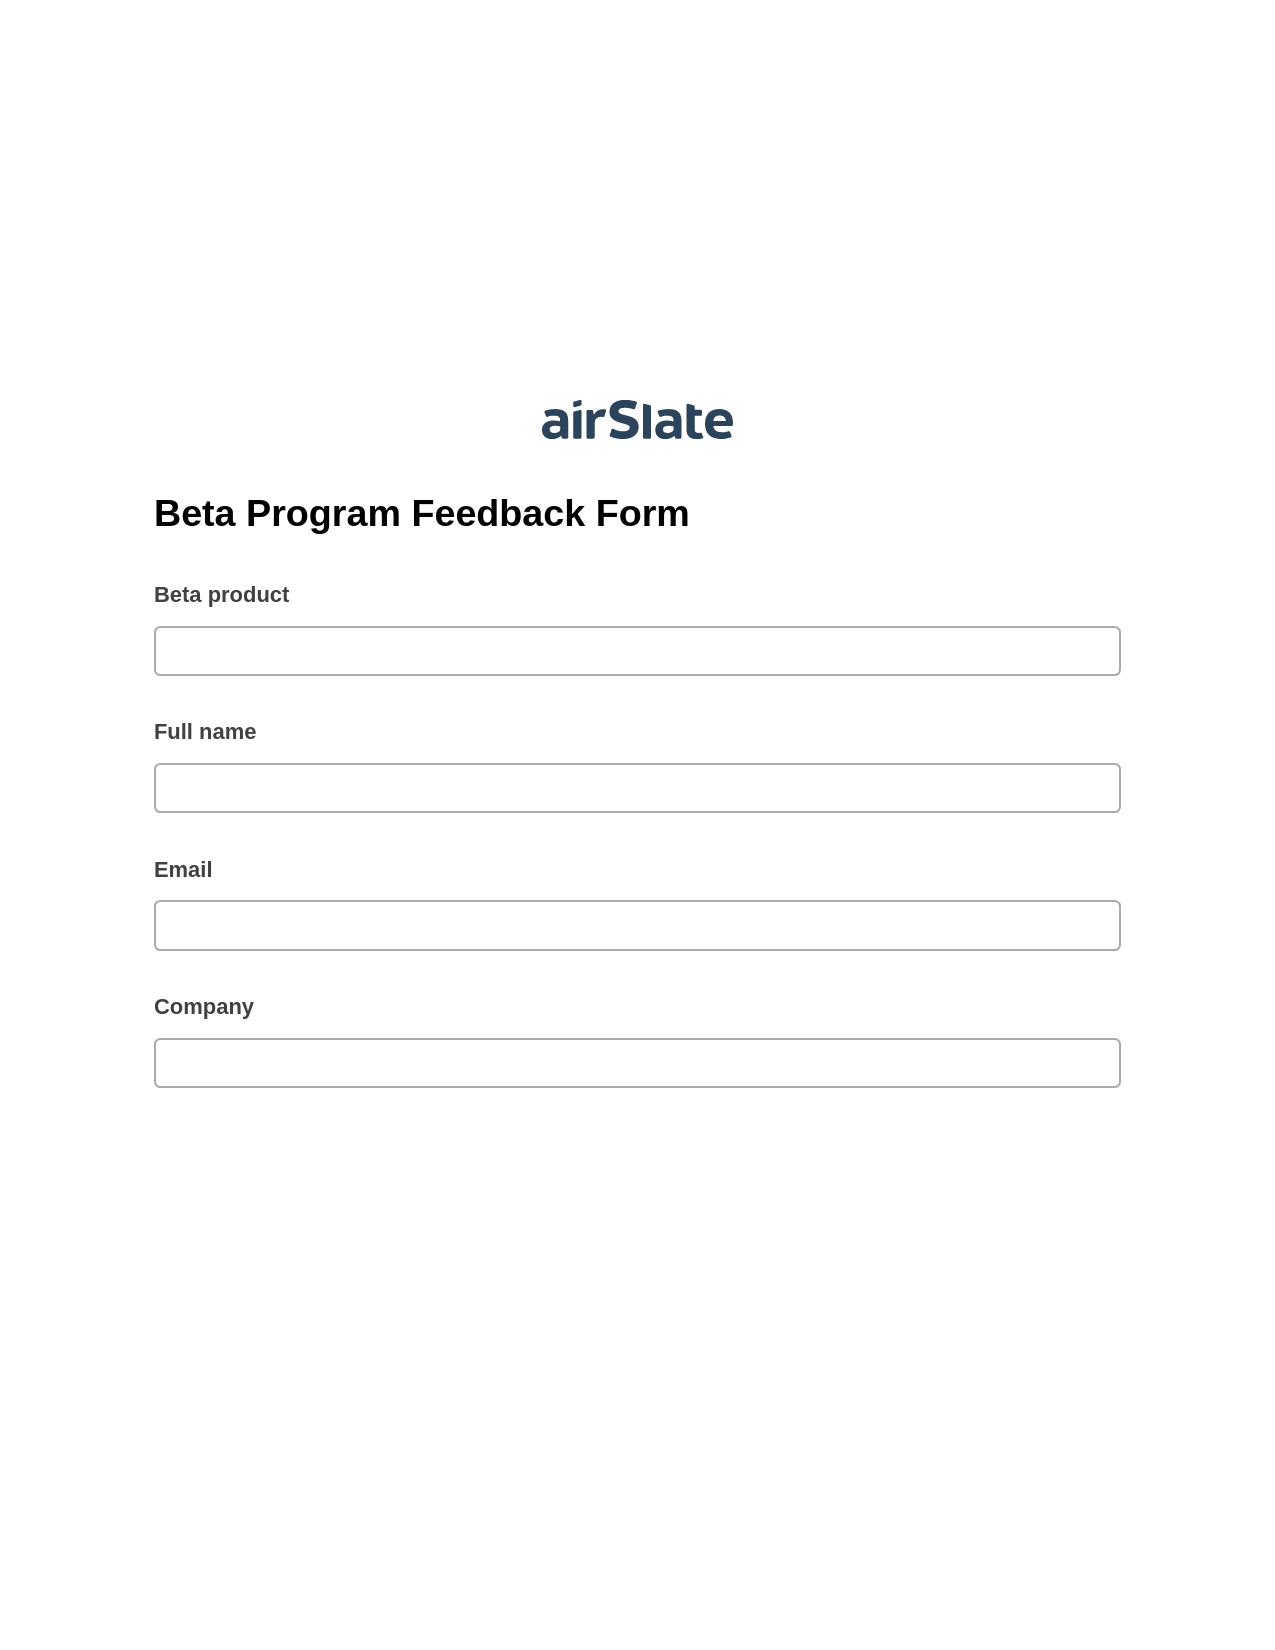 Beta Program Feedback Form Pre-fill from CSV File Bot, Open as Role Bot, Export to MySQL Bot